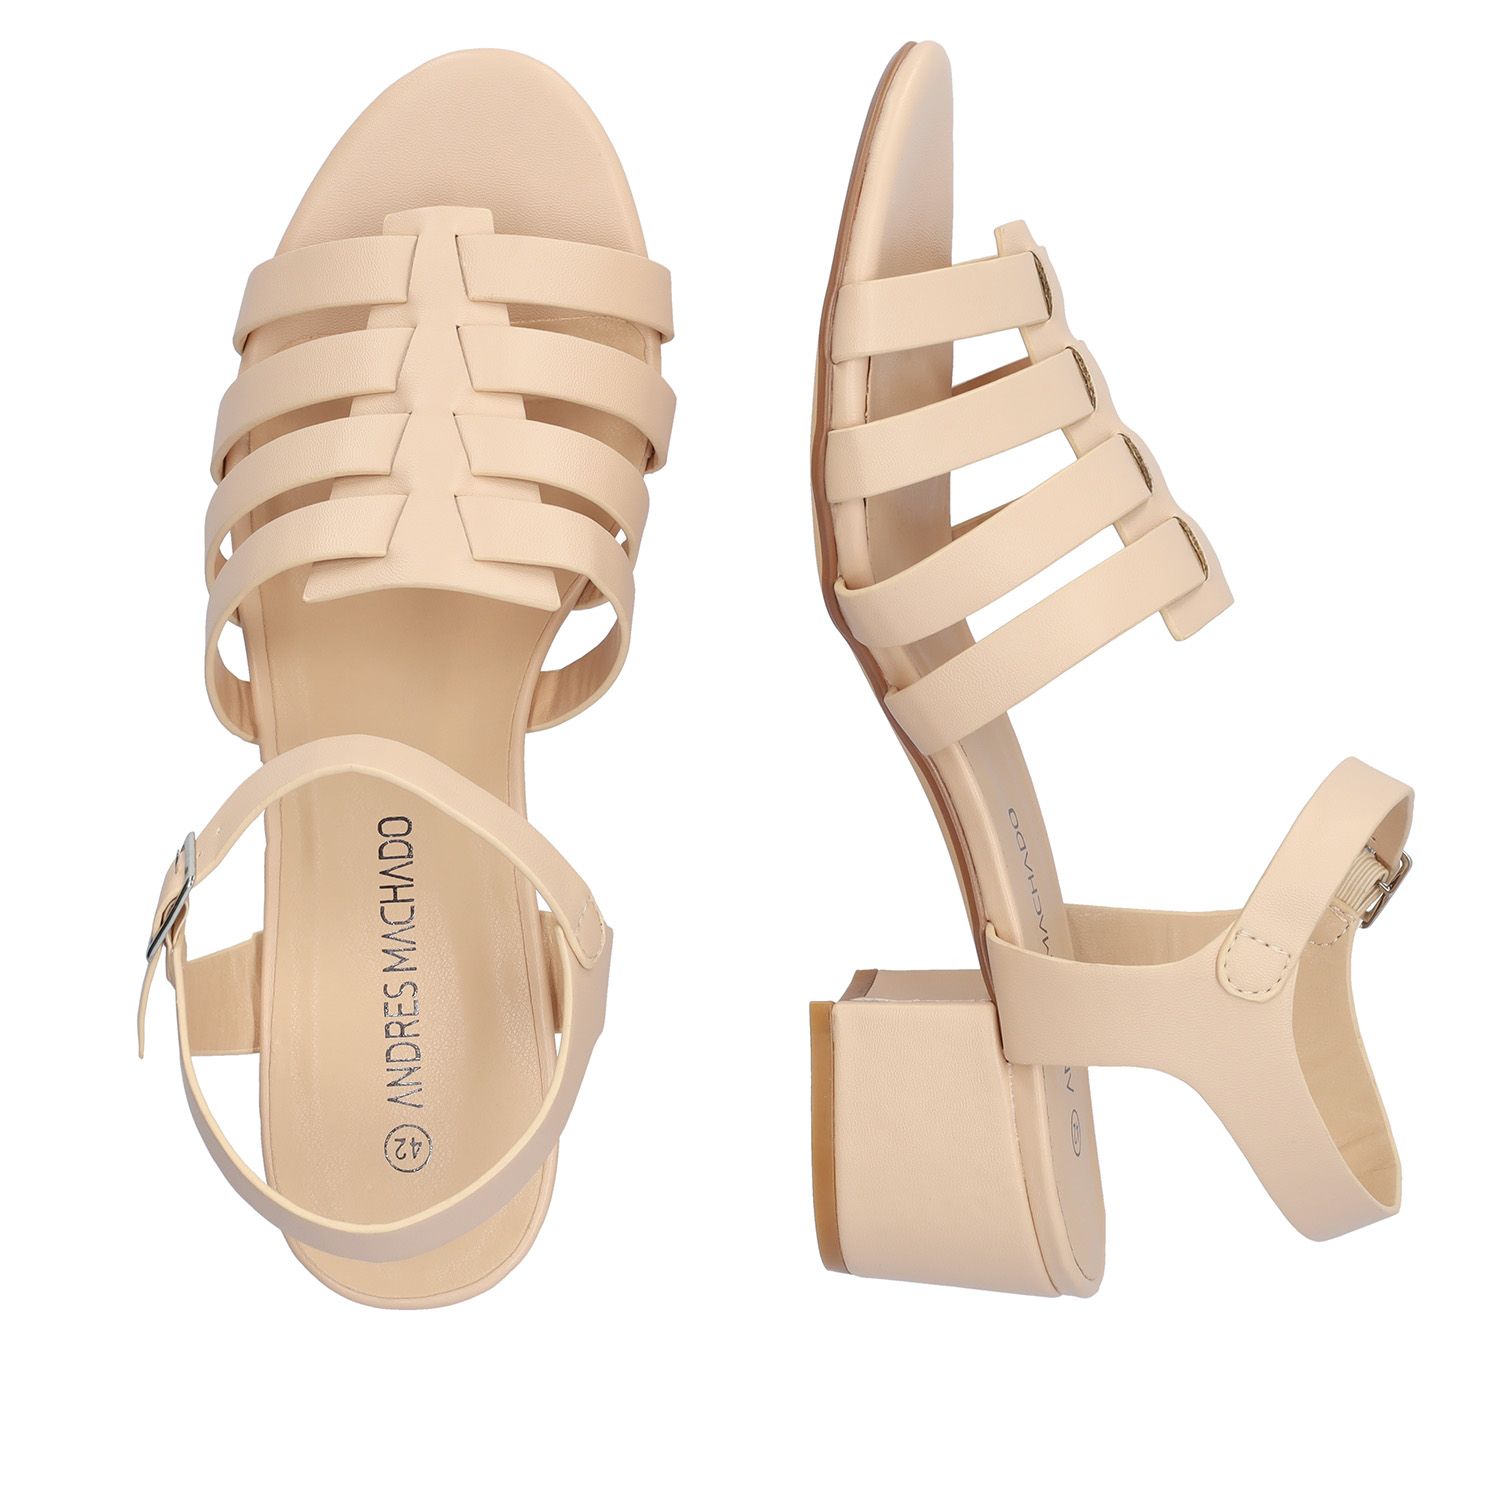 Squared heel sandal in nude soft material 